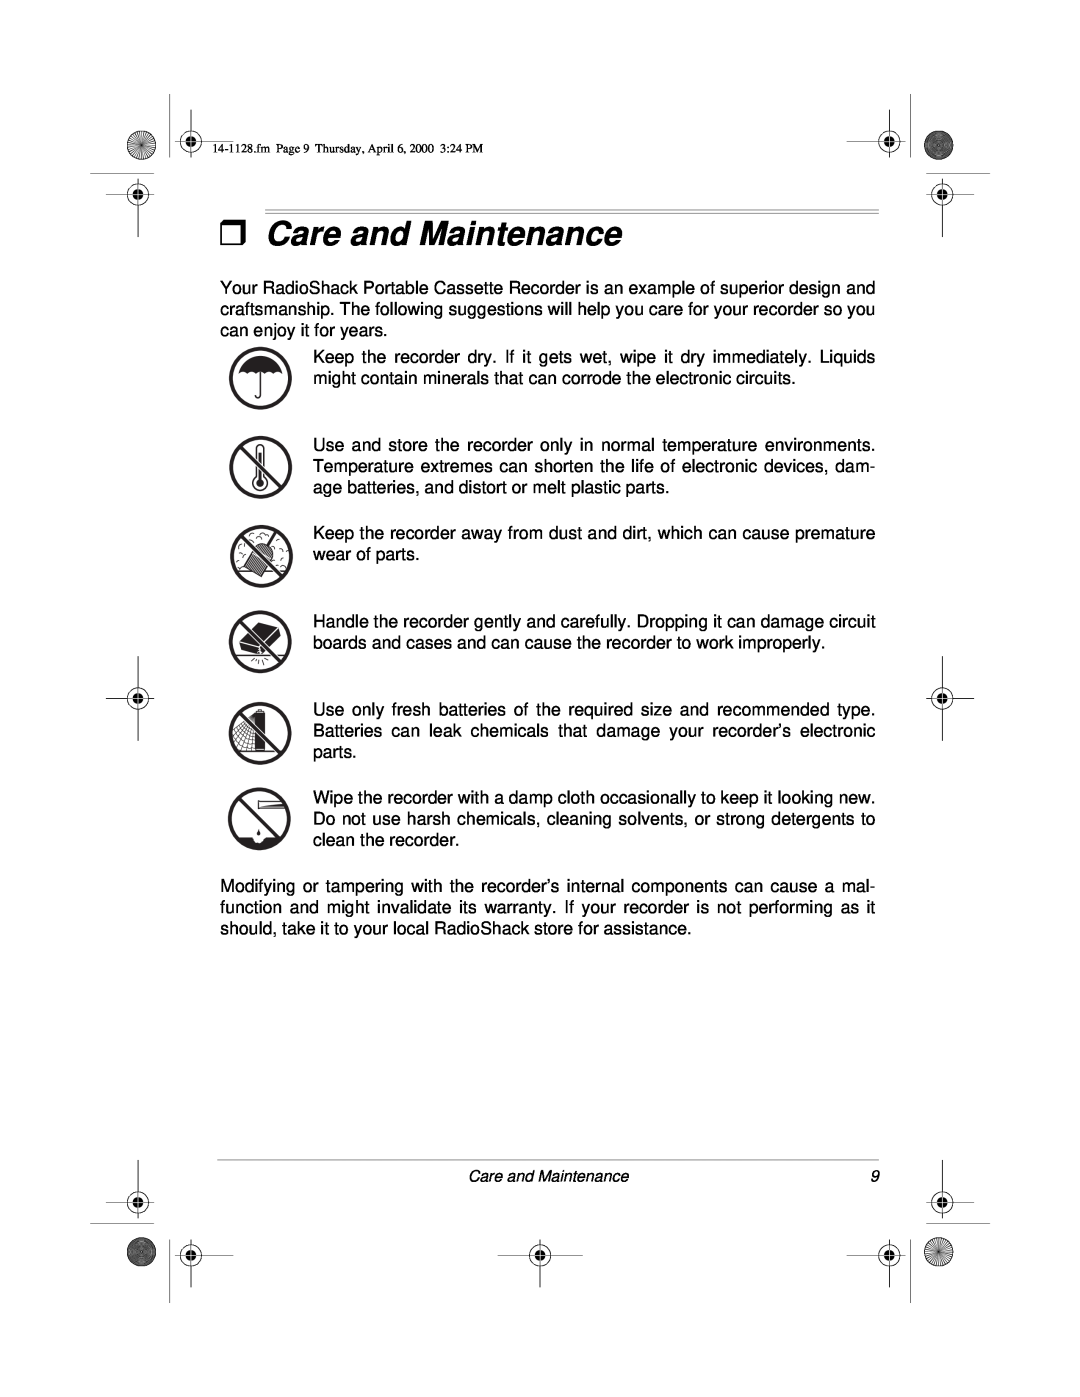 Radio Shack Portable Cassette Recorder owner manual ˆCare and Maintenance 